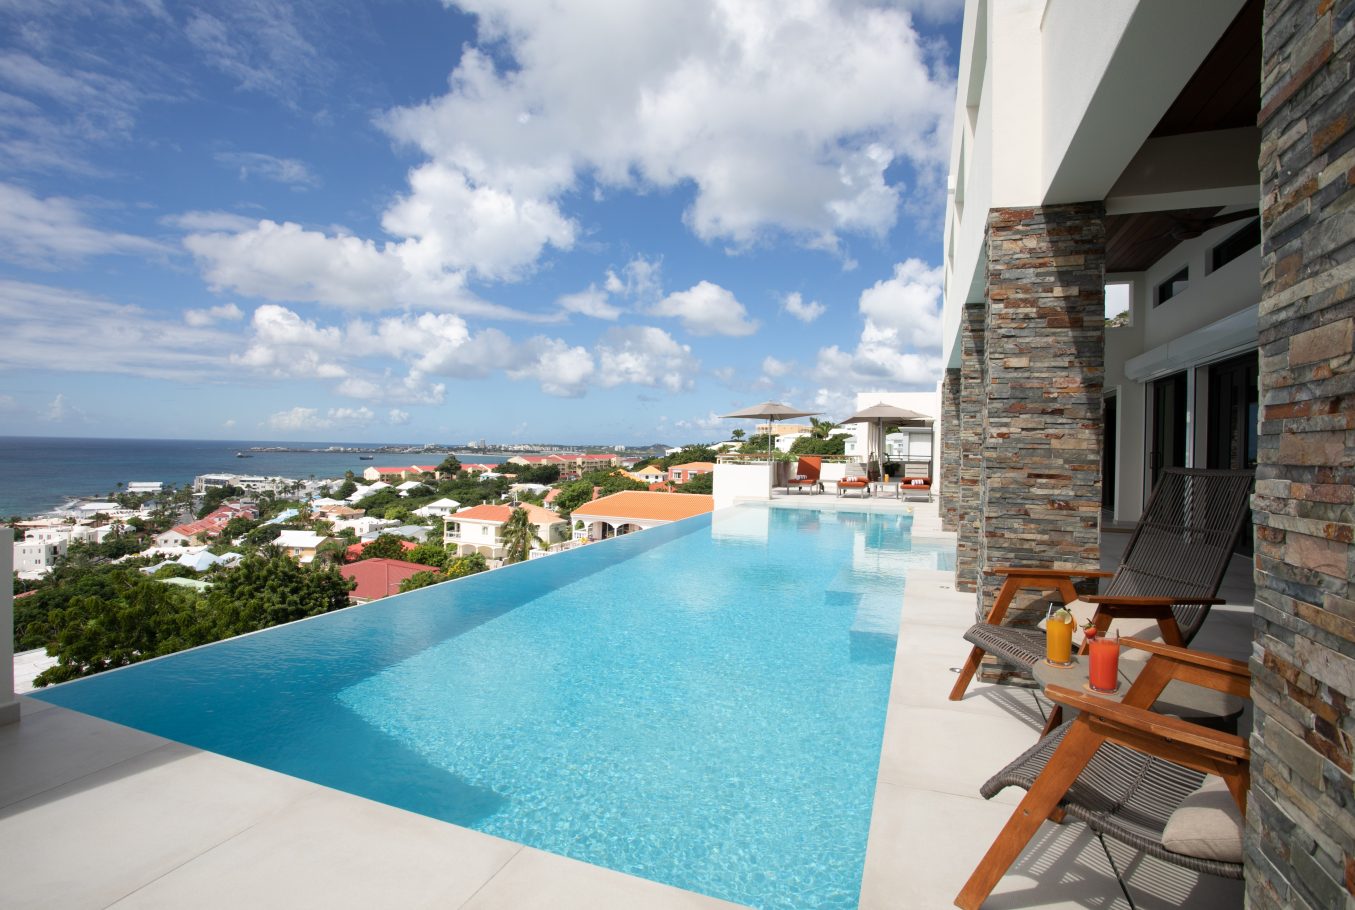 Amazing views from your own infinity pool